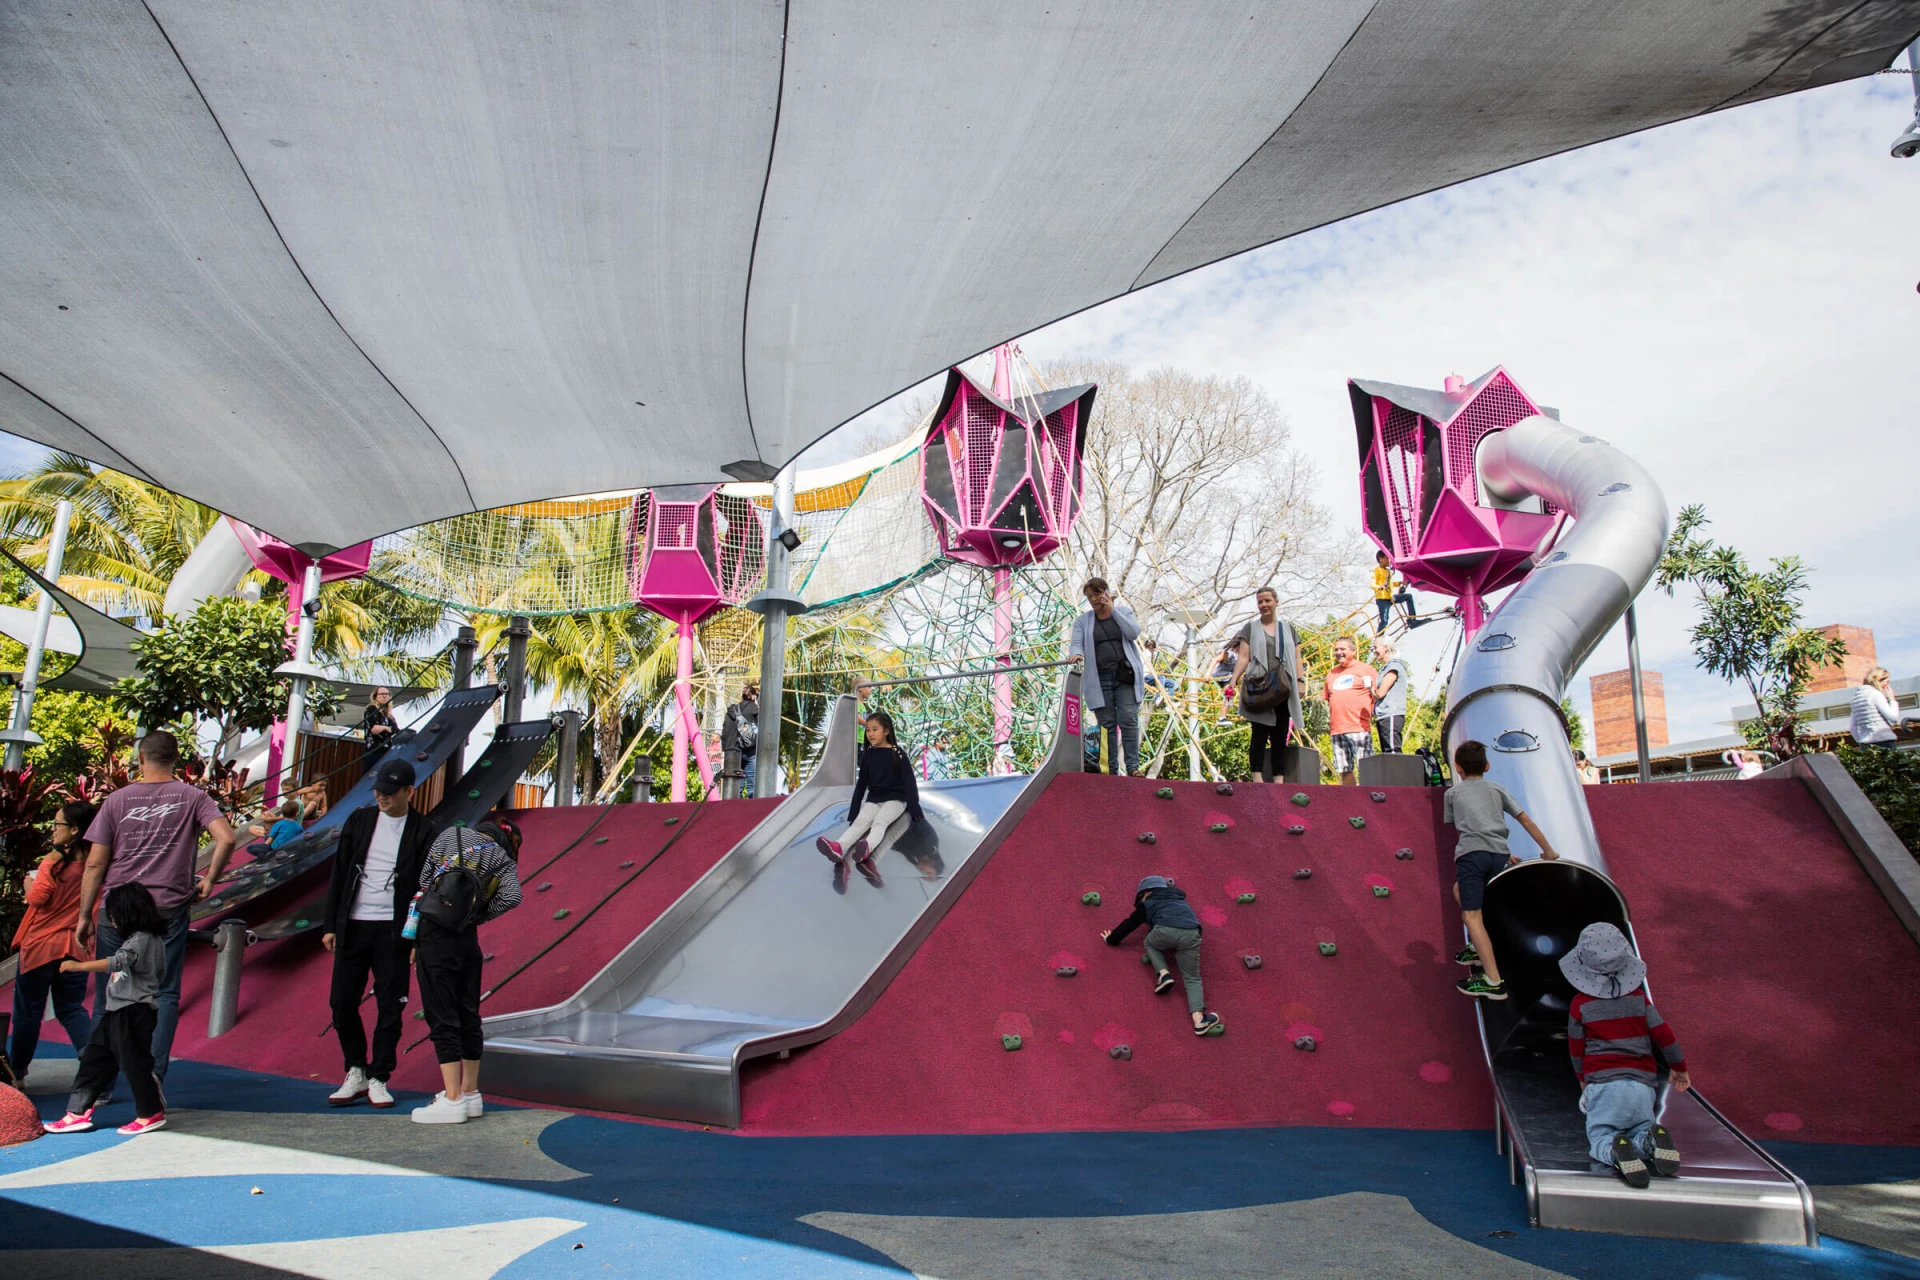 playground in Australia with shading installed to protect from heat